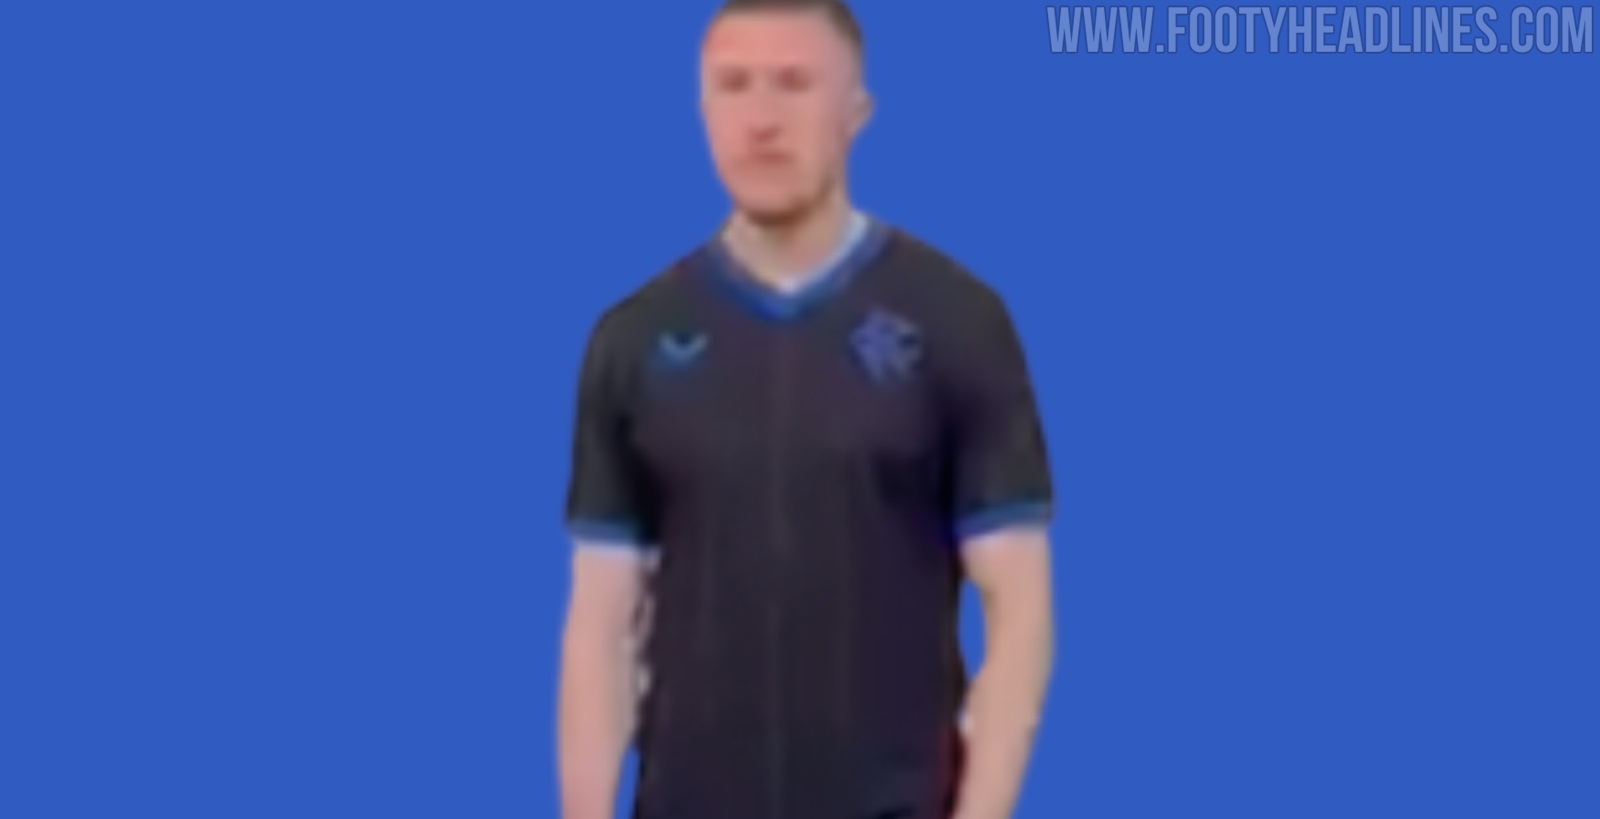 PICTURES: Rangers new kit out